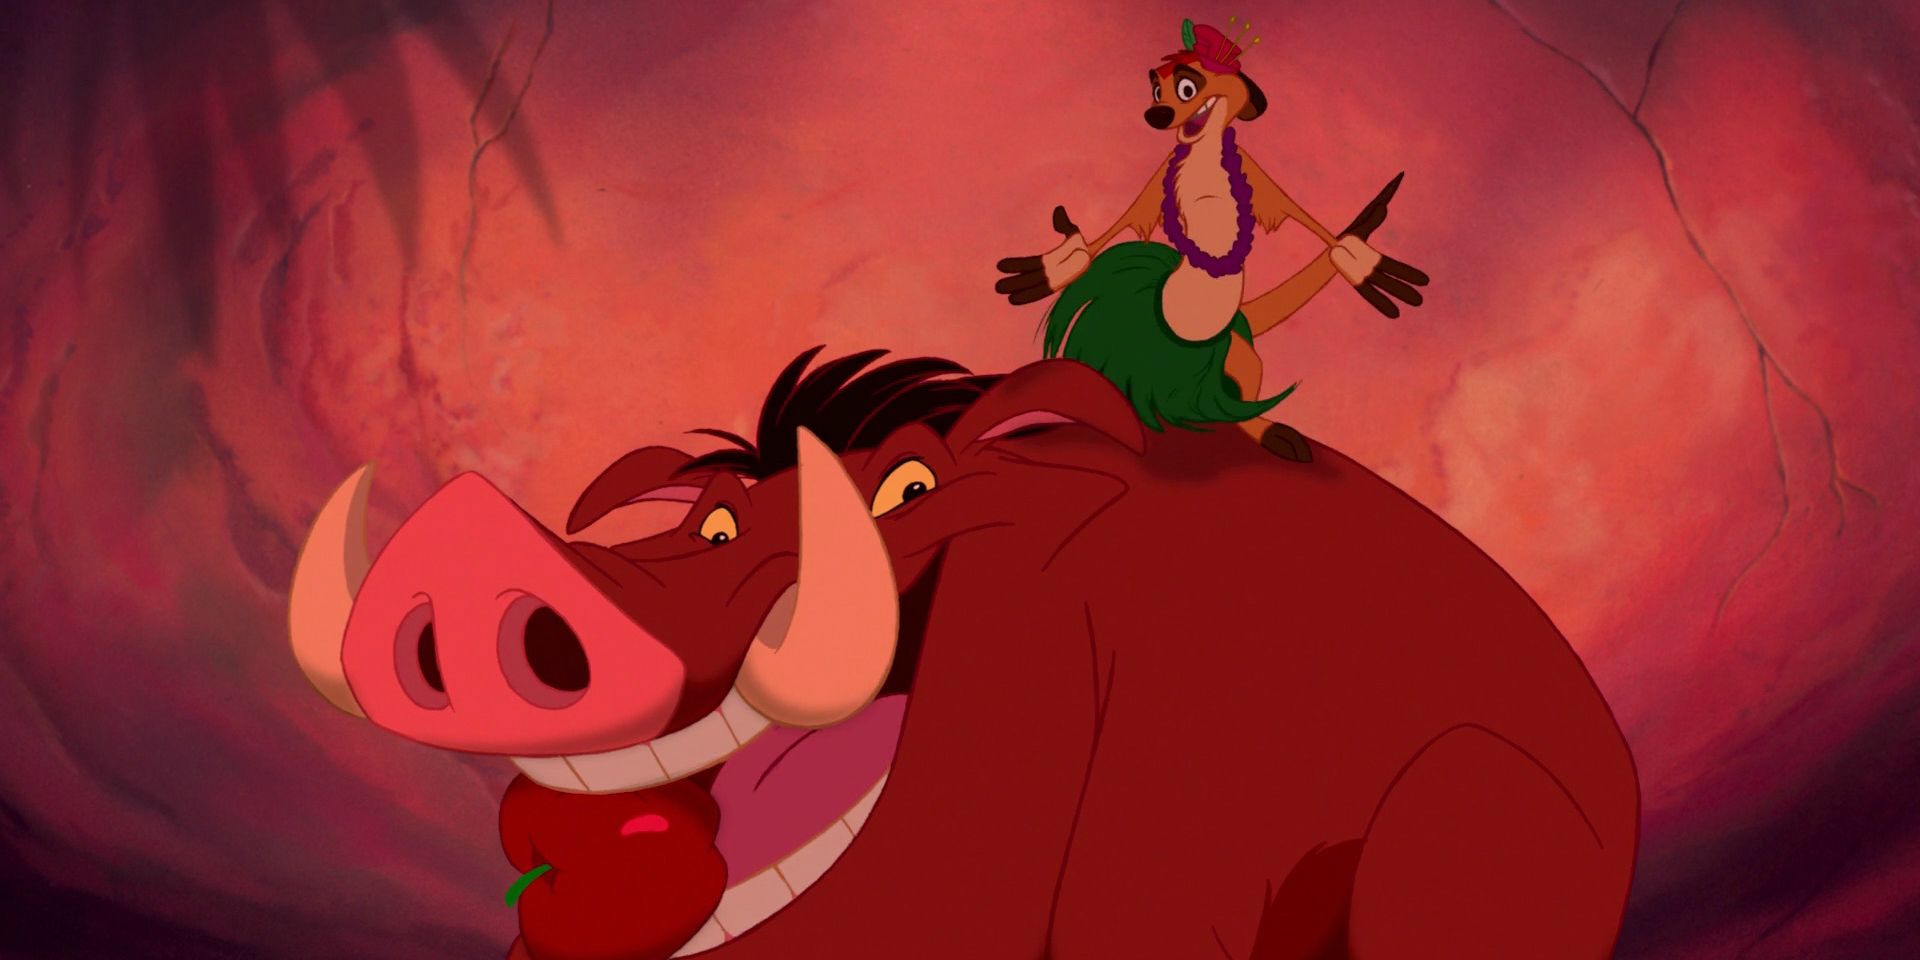 10 Disney Sidekicks & One Quote That Perfectly Sums Up Their Personality